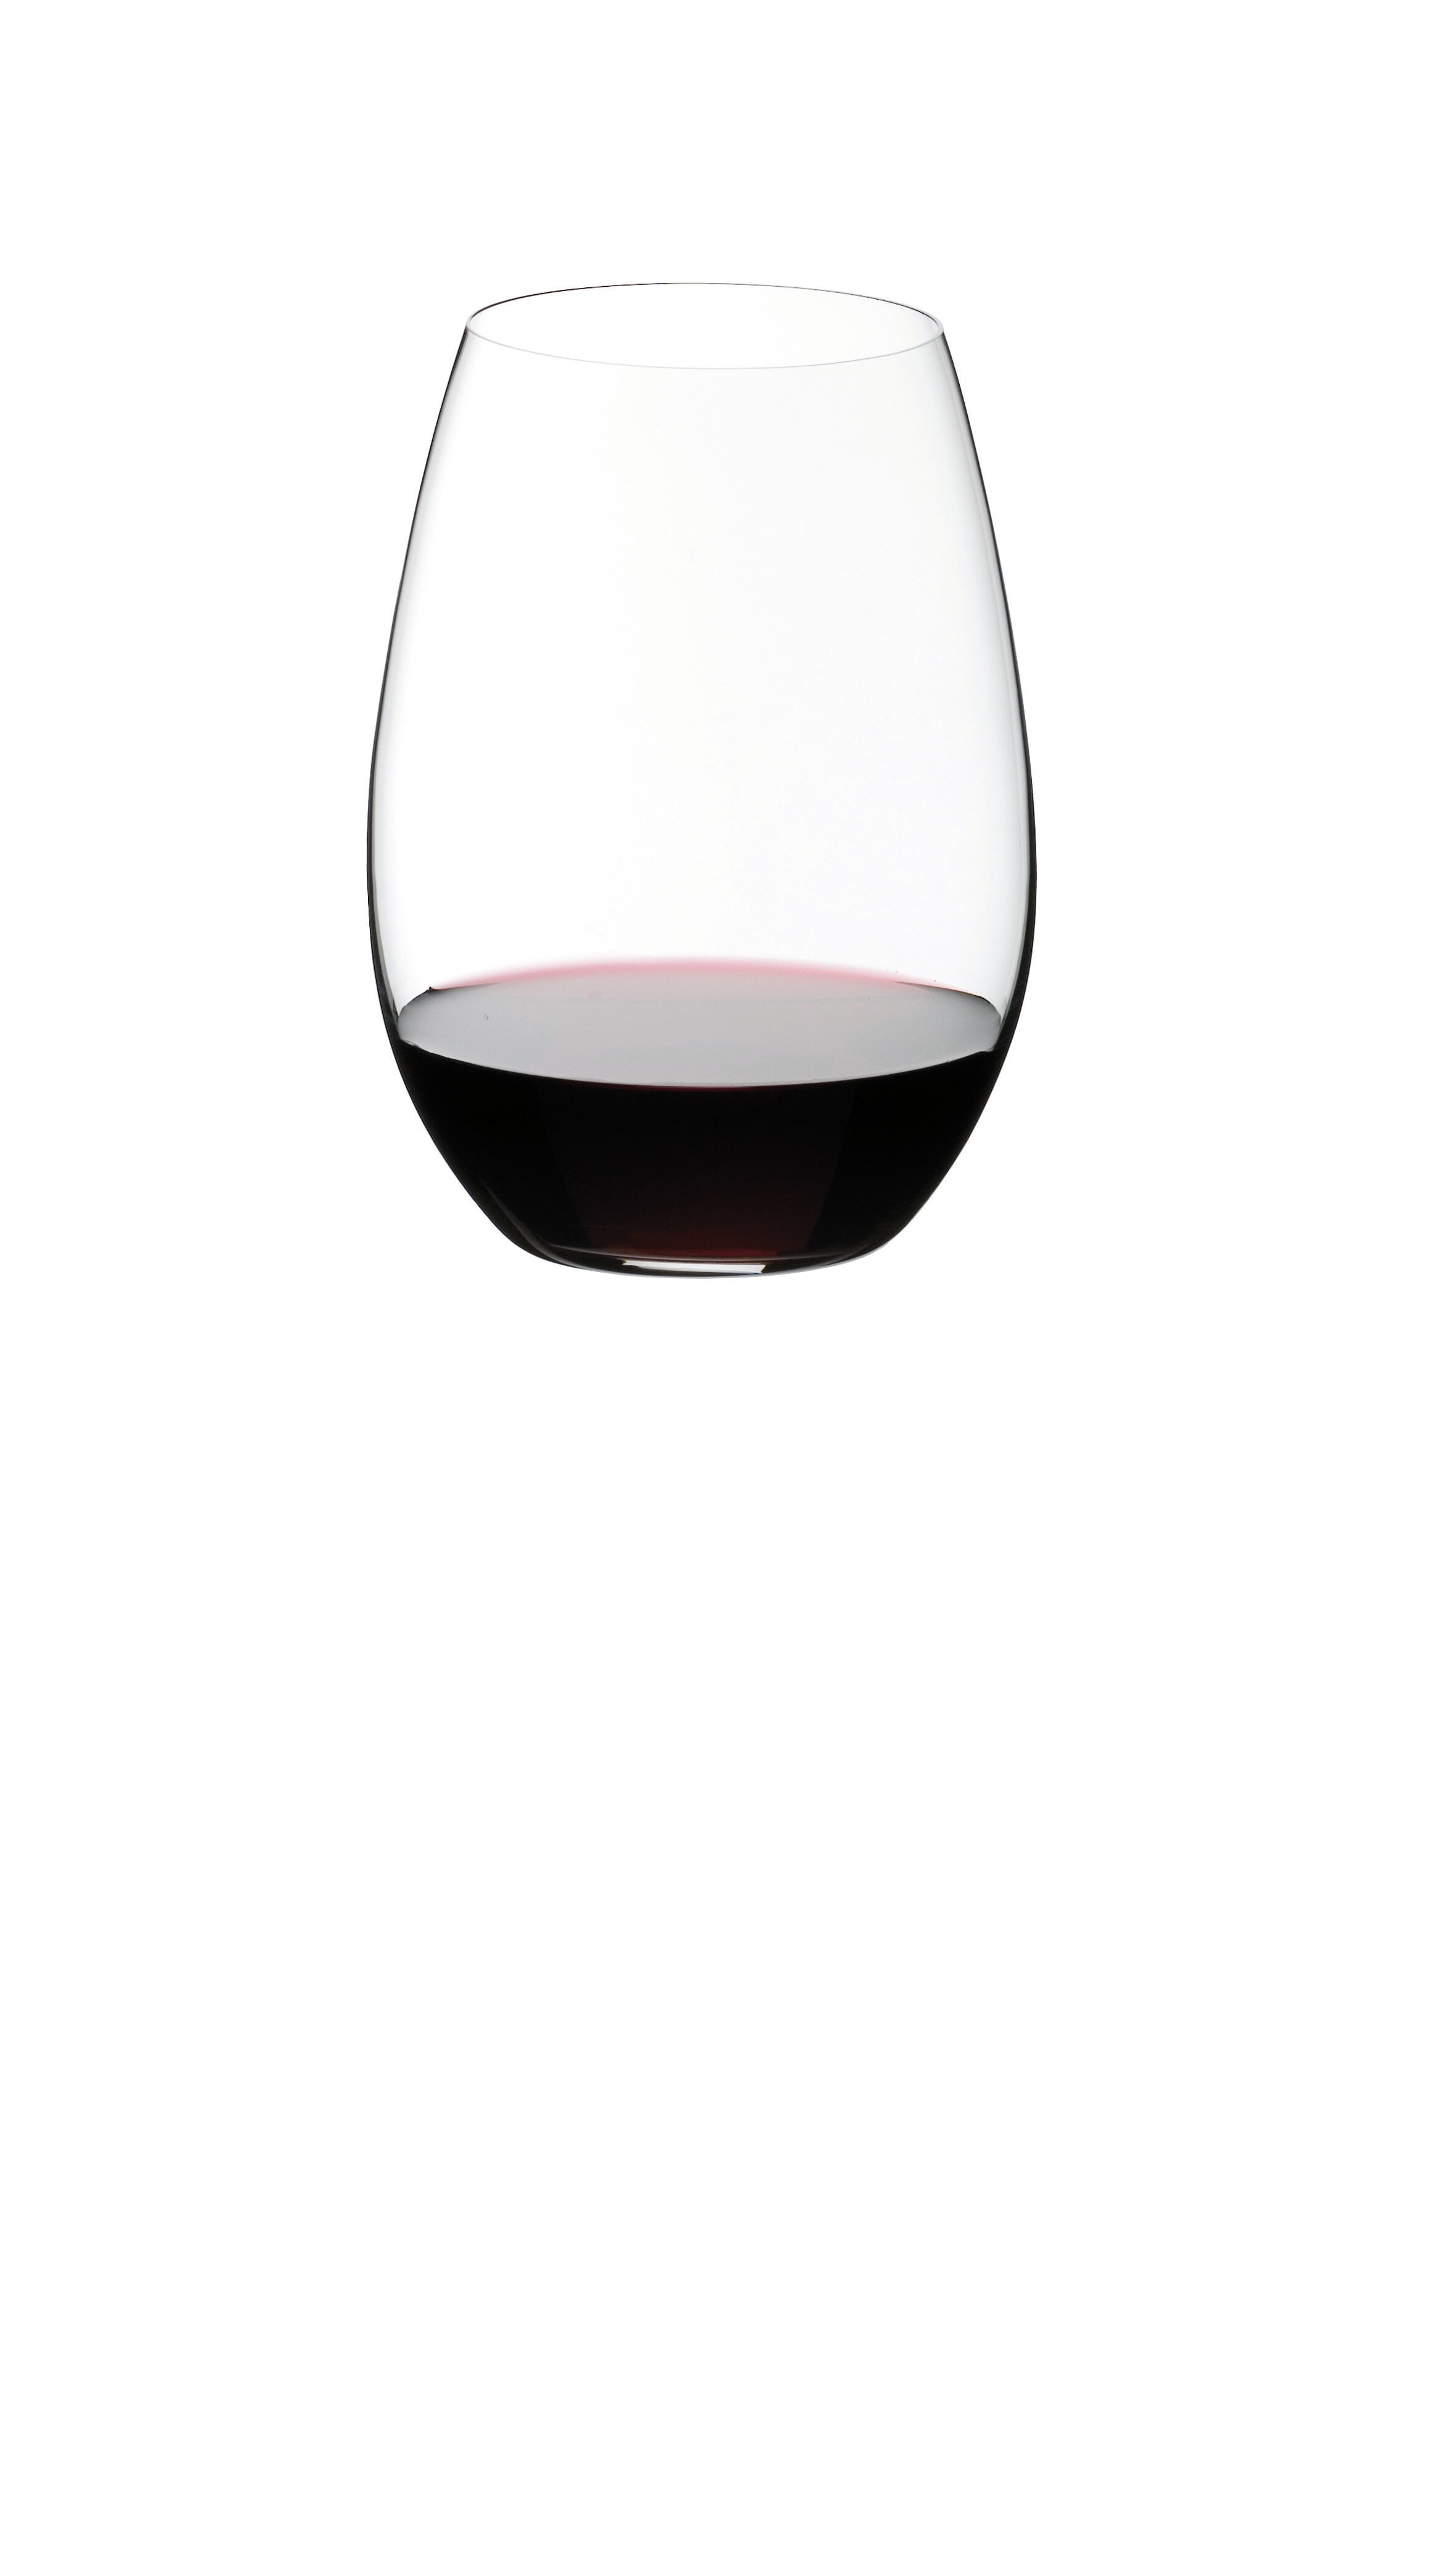 WHOLE HOUSEWARES XL 4-Count Red Wine Glass Set